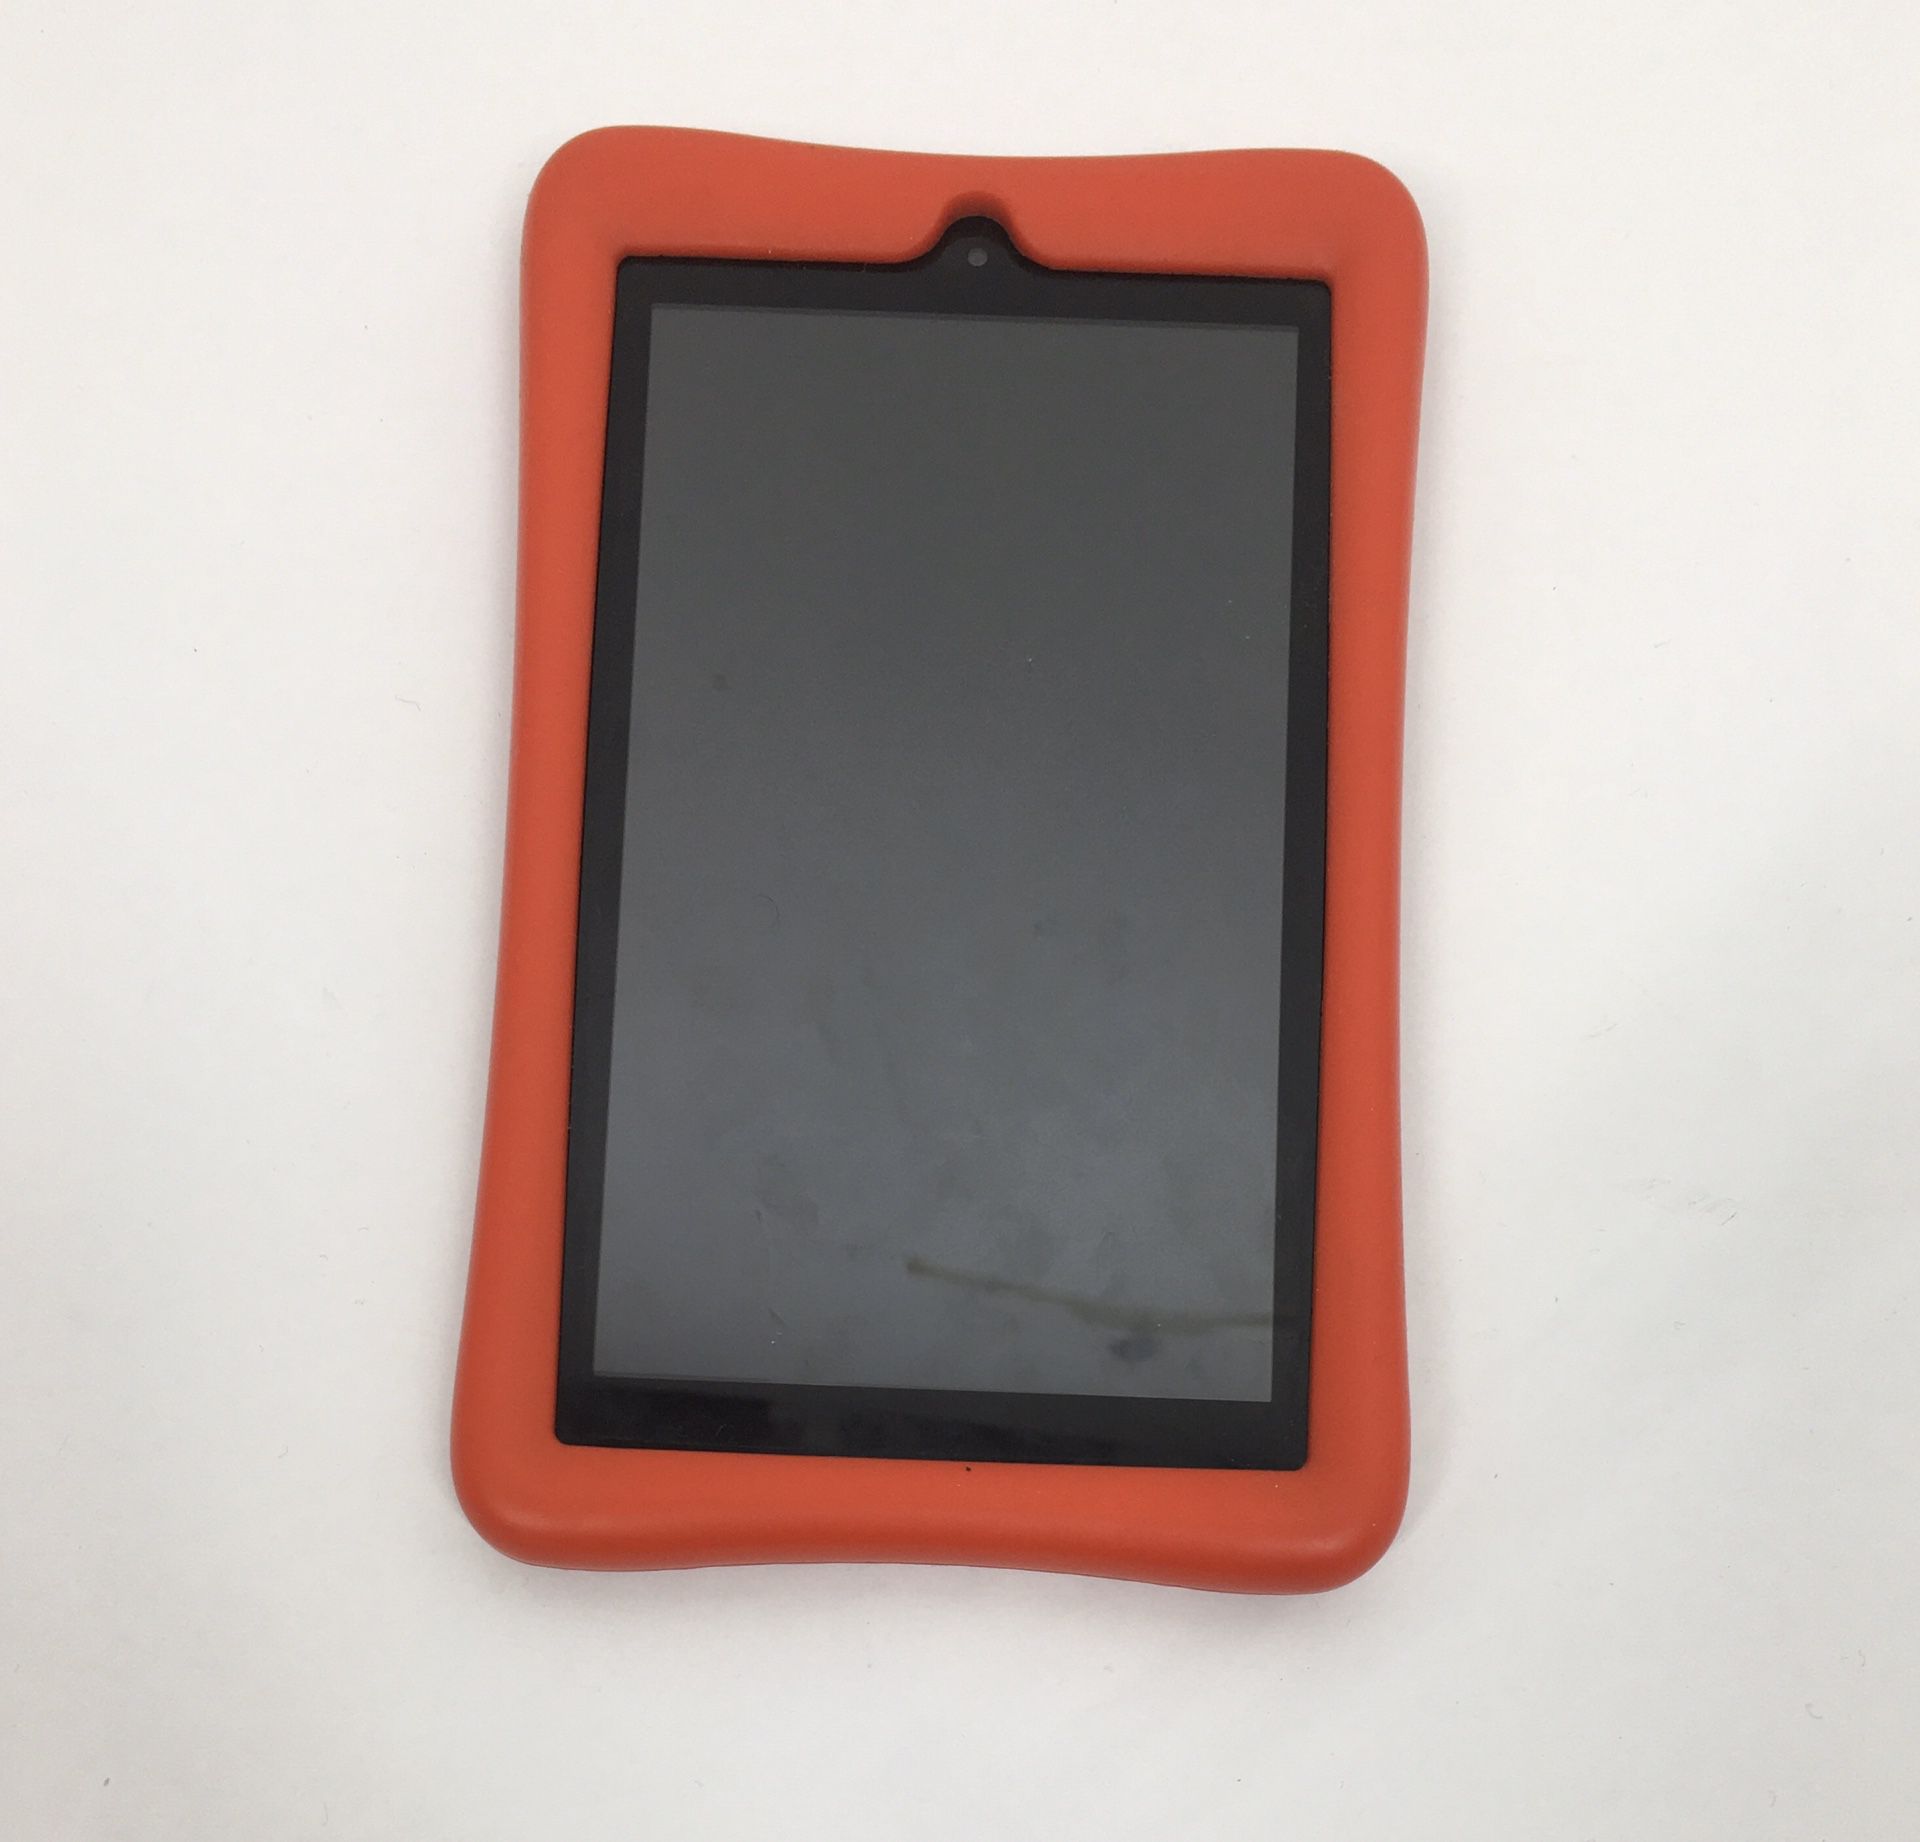 Amazon Series 7 Fire tablet